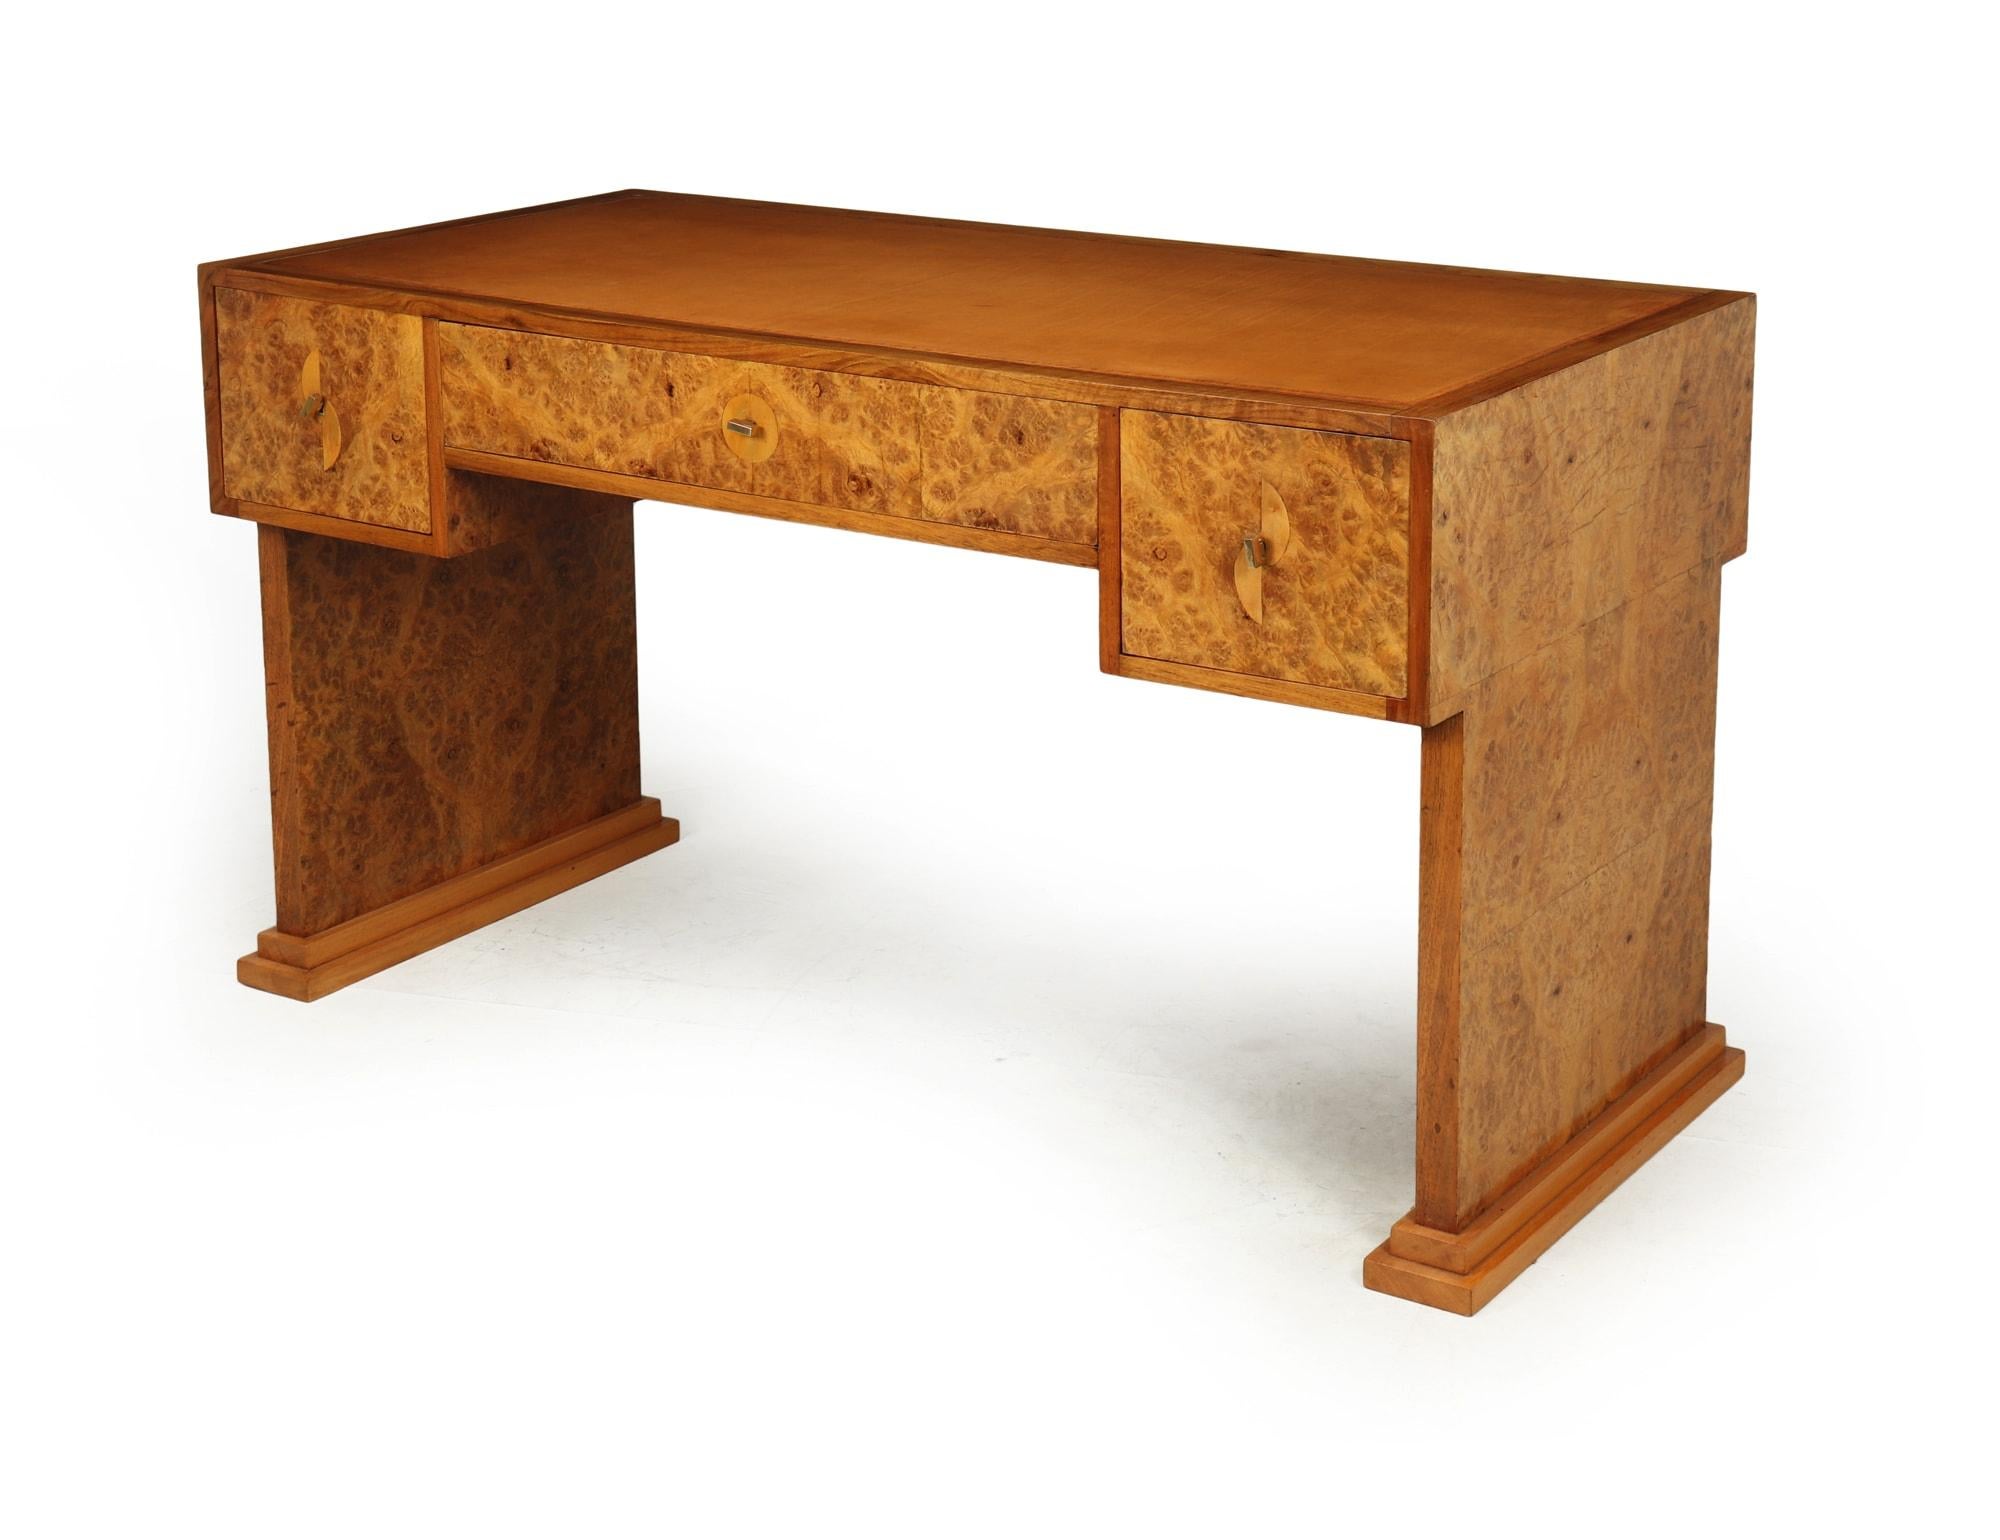 An exceptional quality Art Deco Desk produced in solid oak and walnut with burr maple veneers, thick Hyde Leather writing surface with greek key tooling, decorative inlaid escutcheons and long quality locks with keys.

The desk has been fully